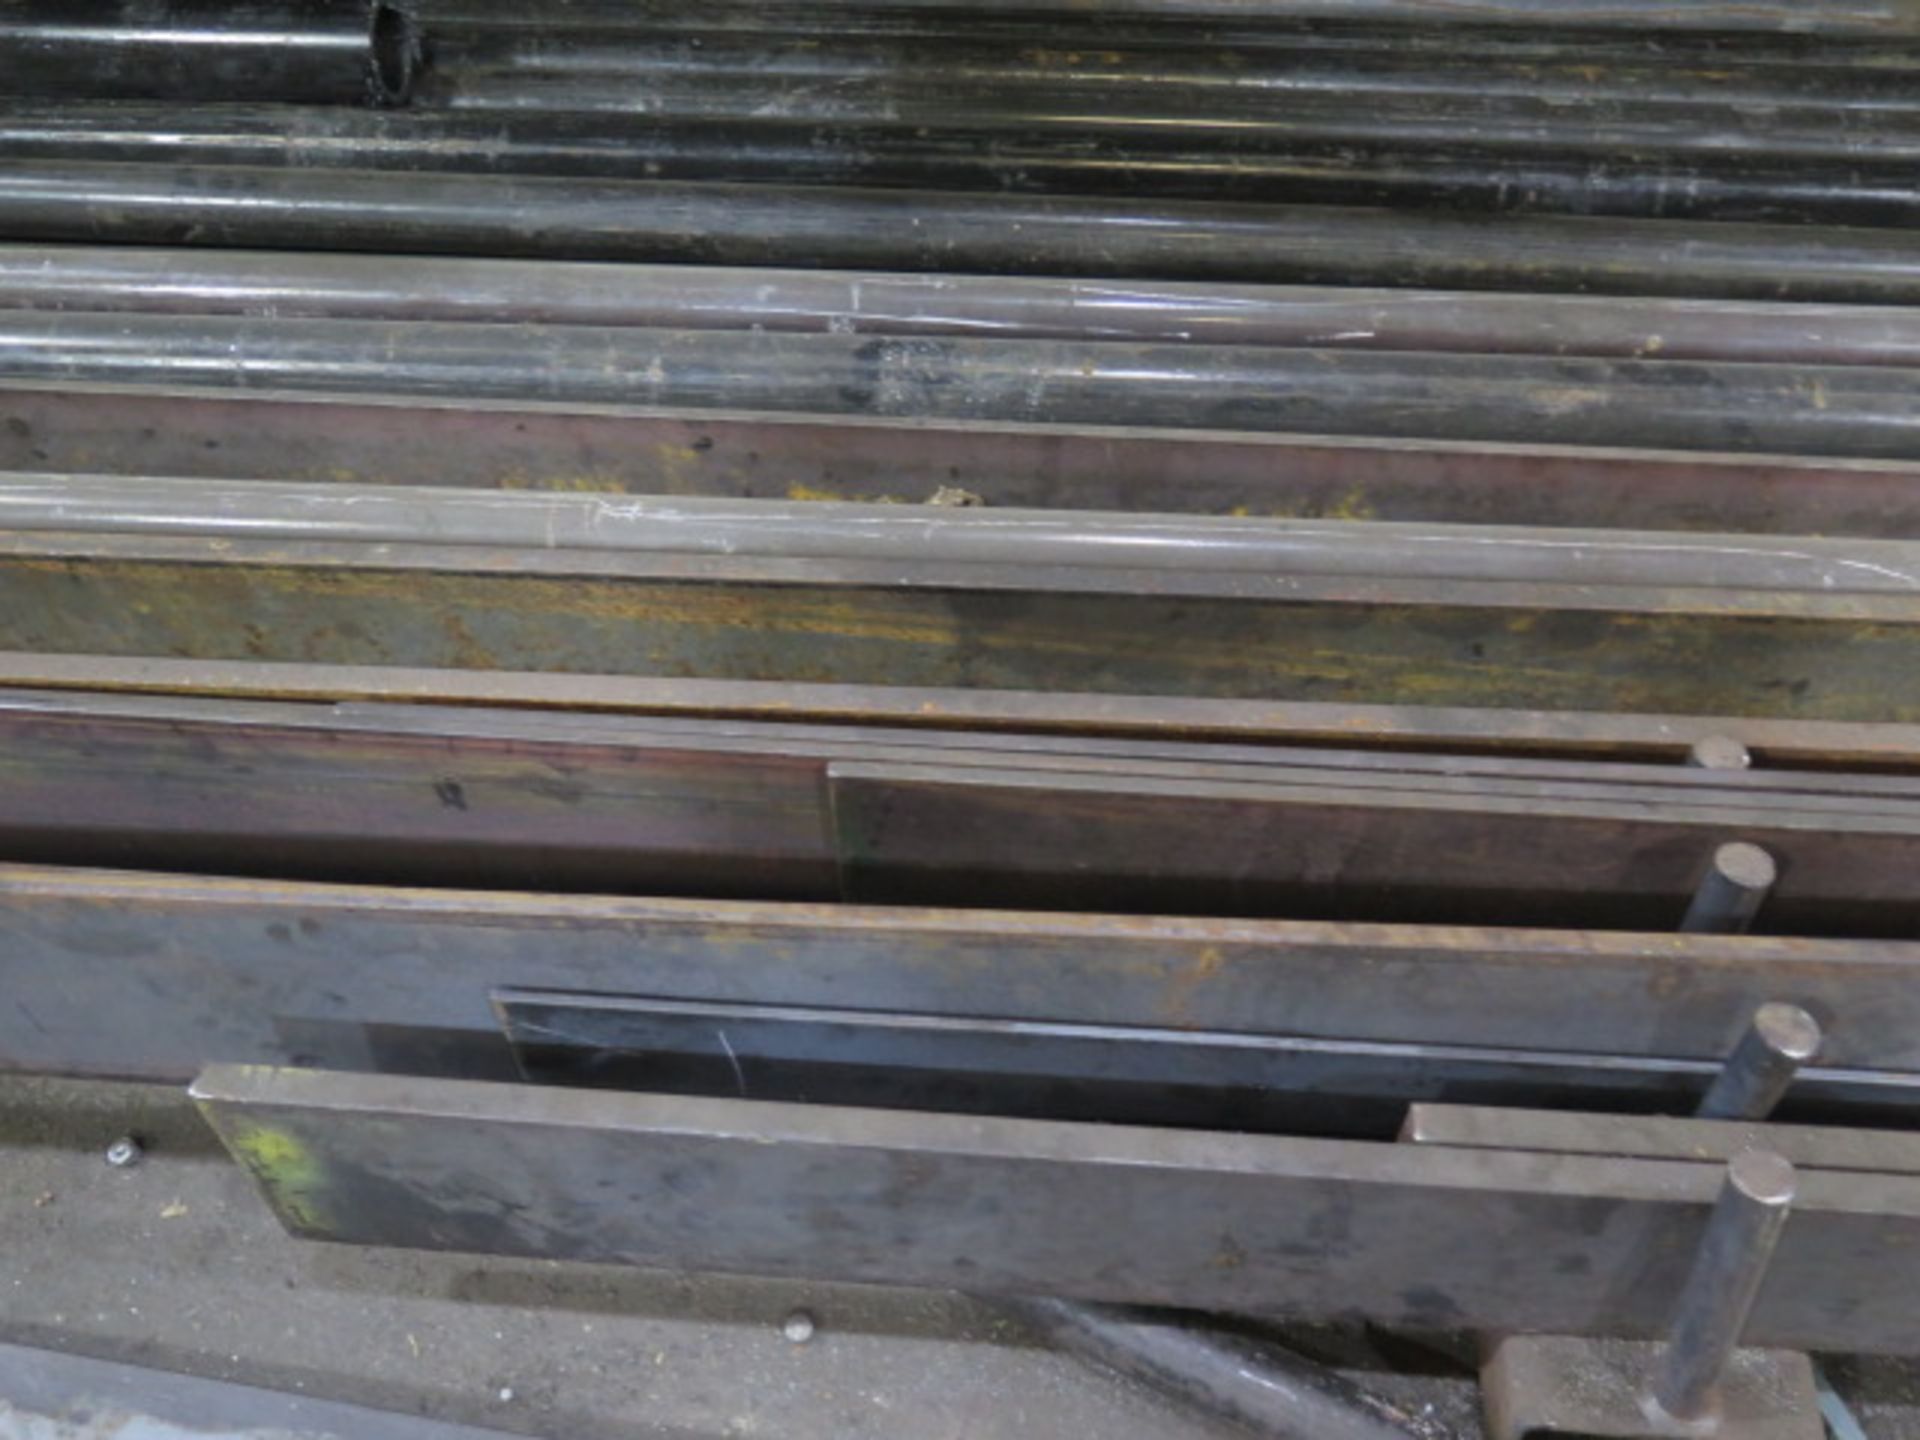 Steel Materials Tubing, Angle Iron, Flat Stock and Challel Stock (SOLD AS-IS - NO WARRANTY) - Image 4 of 11